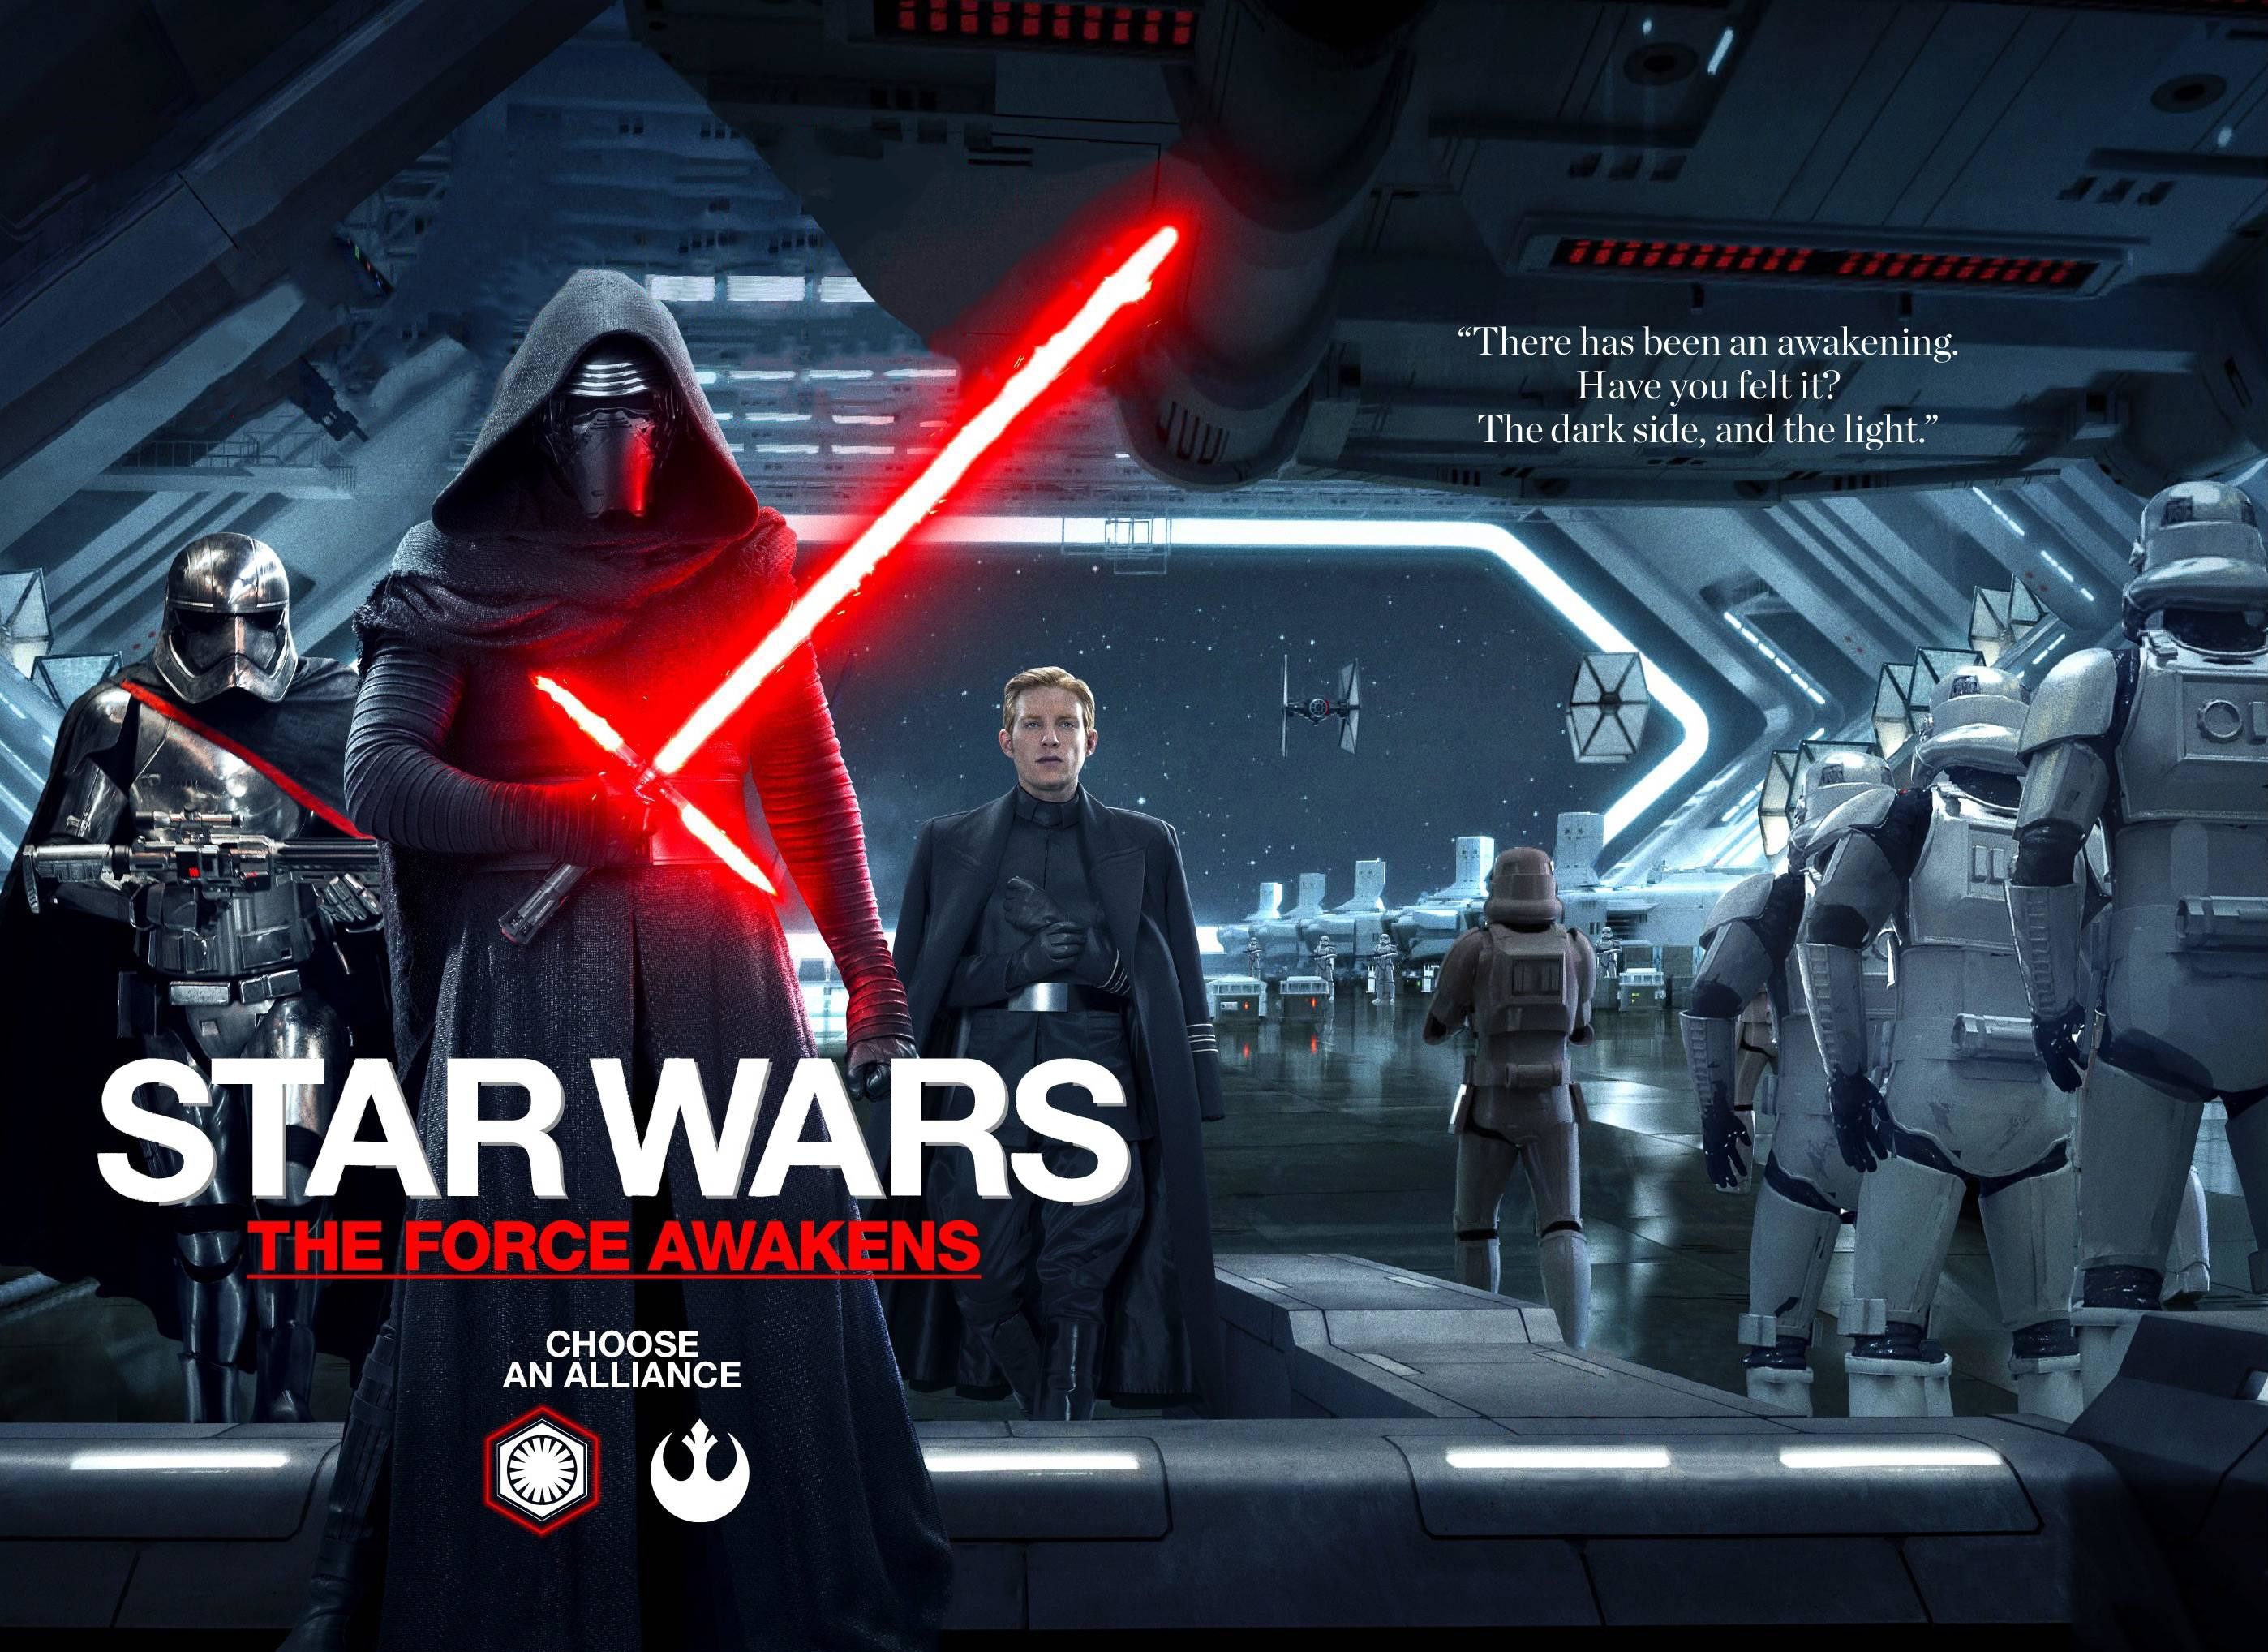 2796x2036 Star Wars: The Force Awakens Empire Magazine Covers (Wallpaper/Poster Edits)